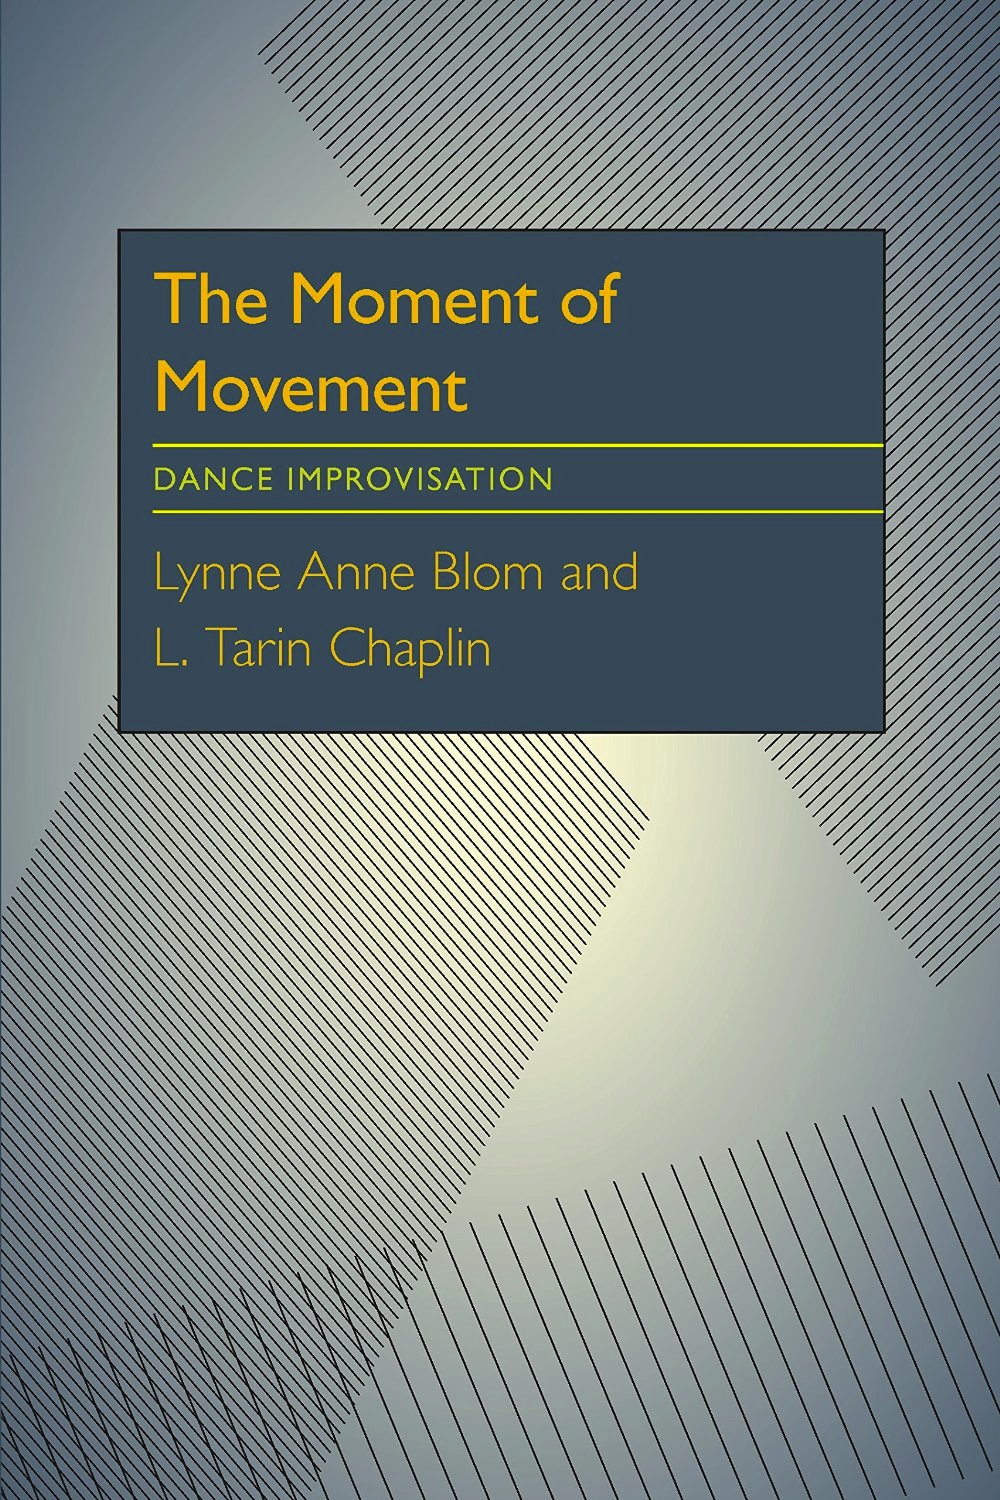 The Moment of Movement: Dance Improvisation<br>Lynne Anne Blom and L. Tarin Chaplin